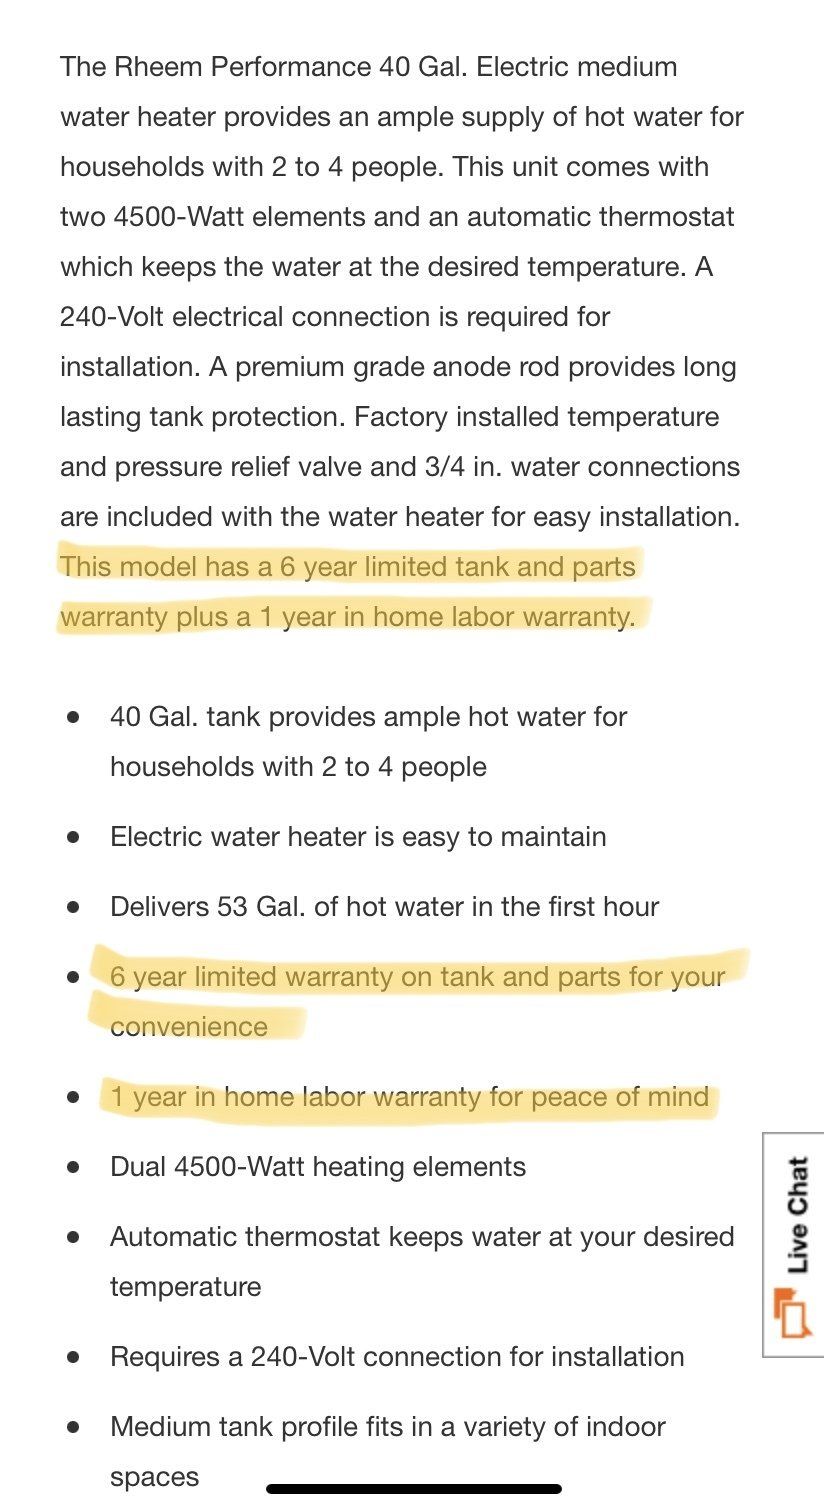 Screenshot of Details for Rheem Residential Water Heater Warranty for Labor, Parts, and Tank